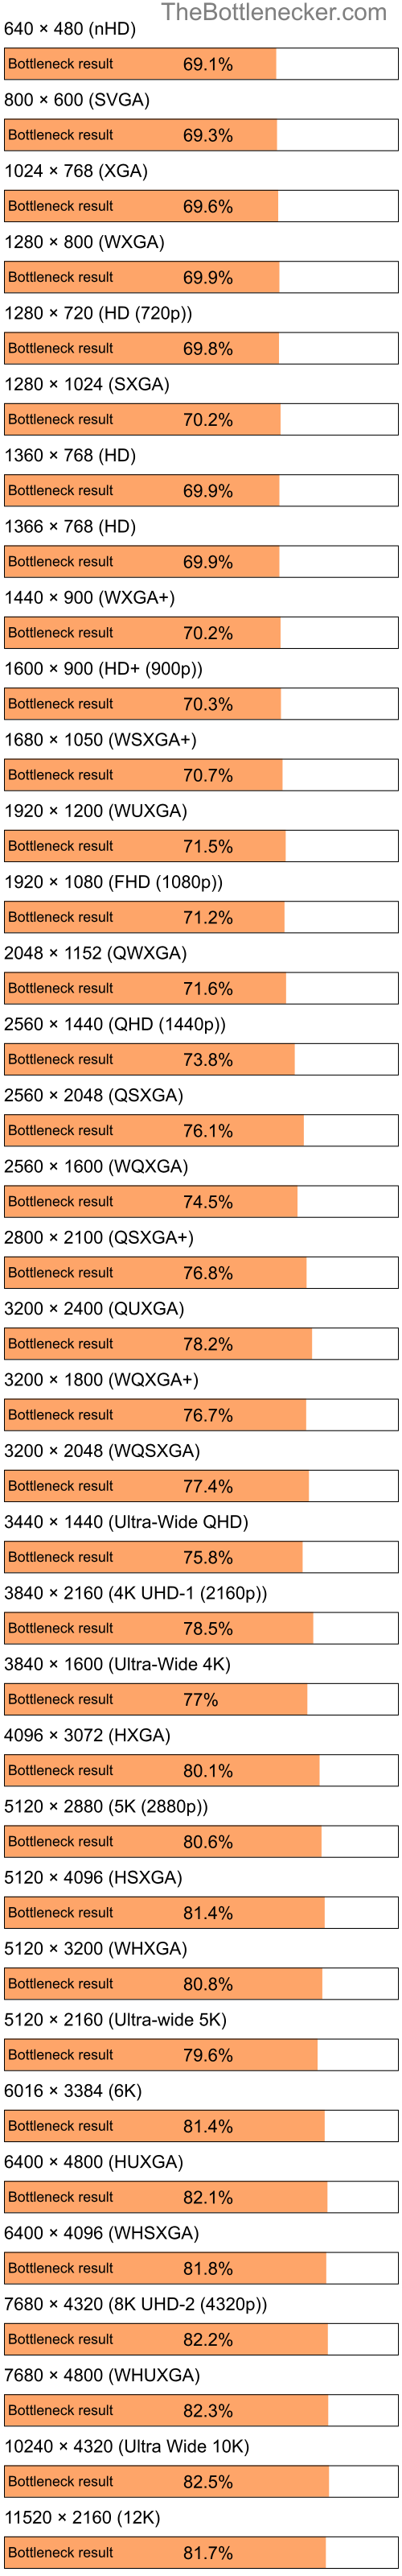 Bottleneck results by resolution for Intel Pentium 4 and NVIDIA Quadro NVS 150M in General Tasks